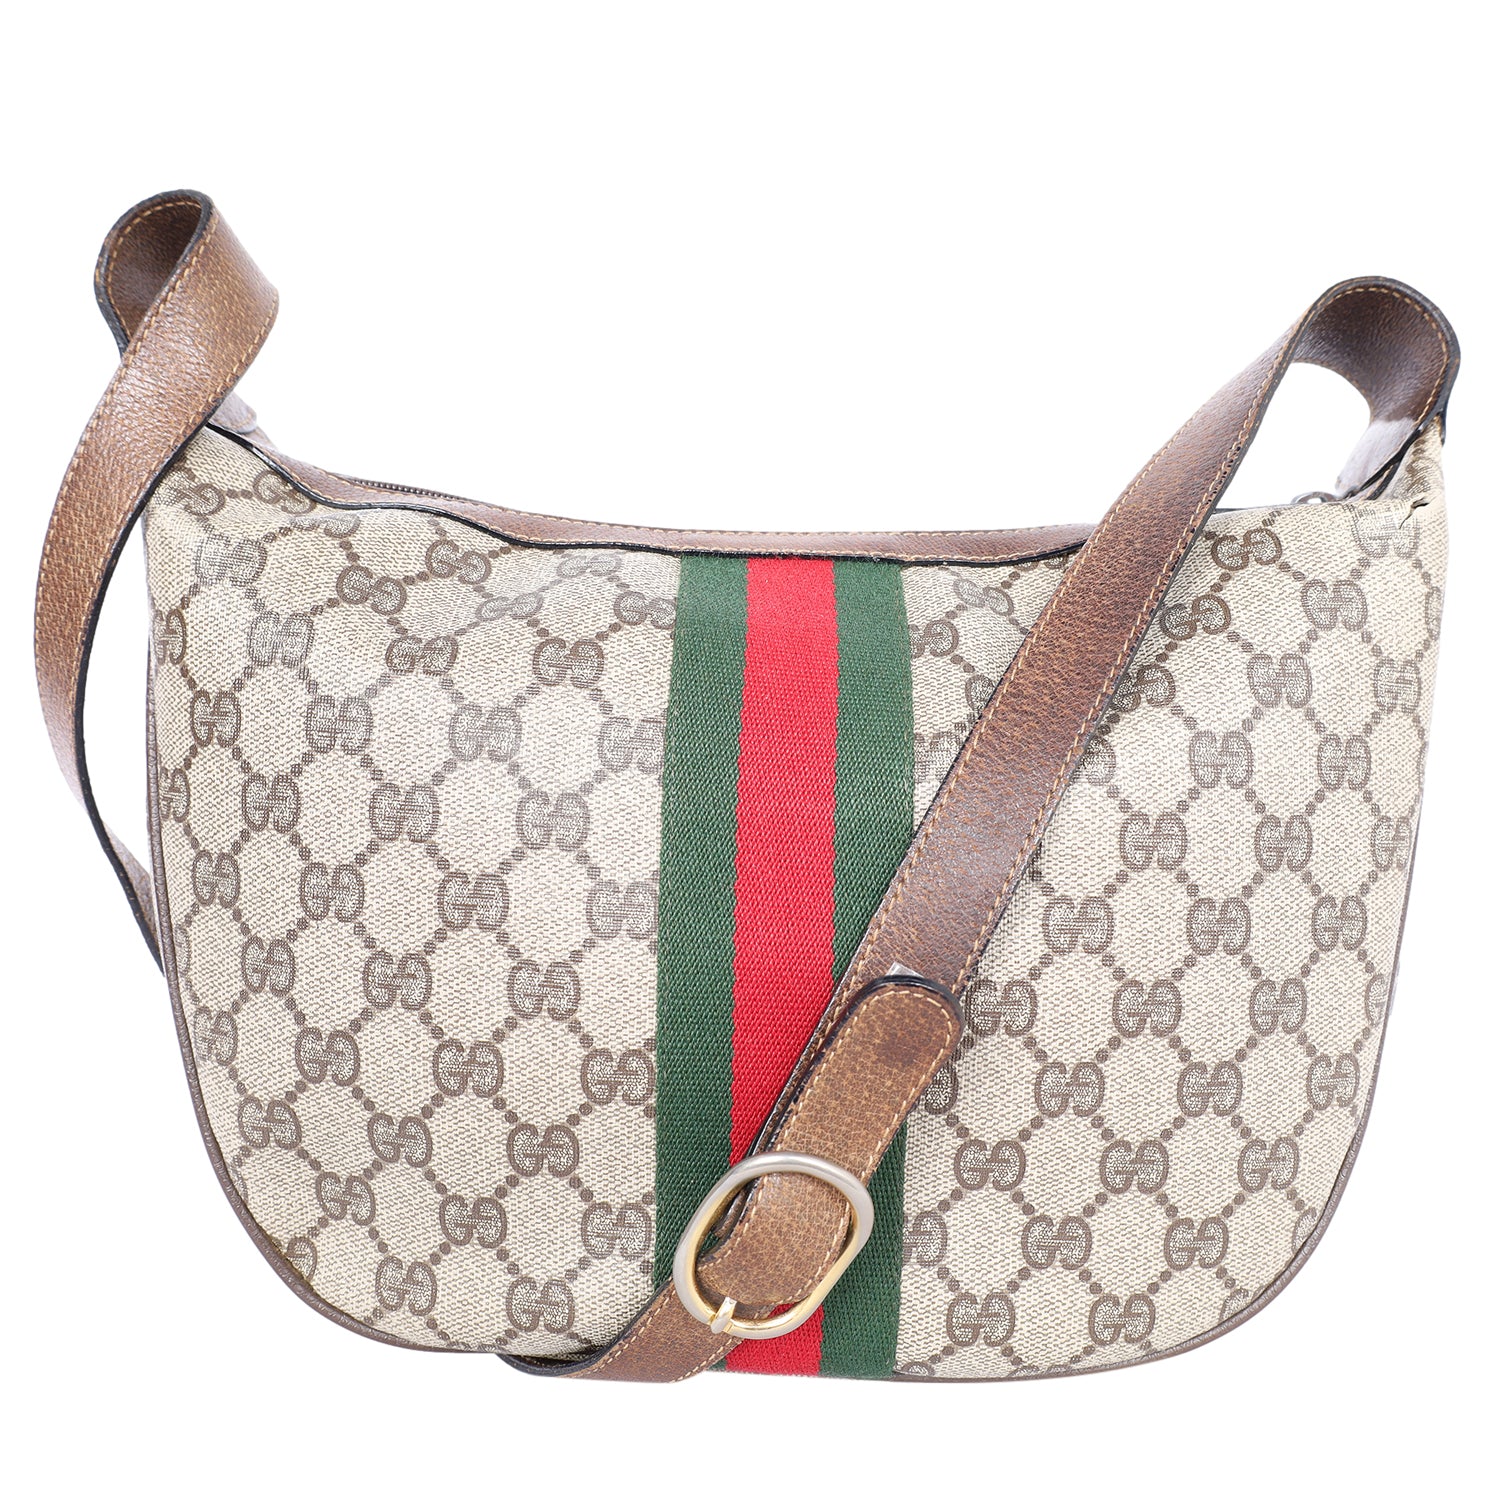 Used Authentic Gucci GG Large Hobo Bag